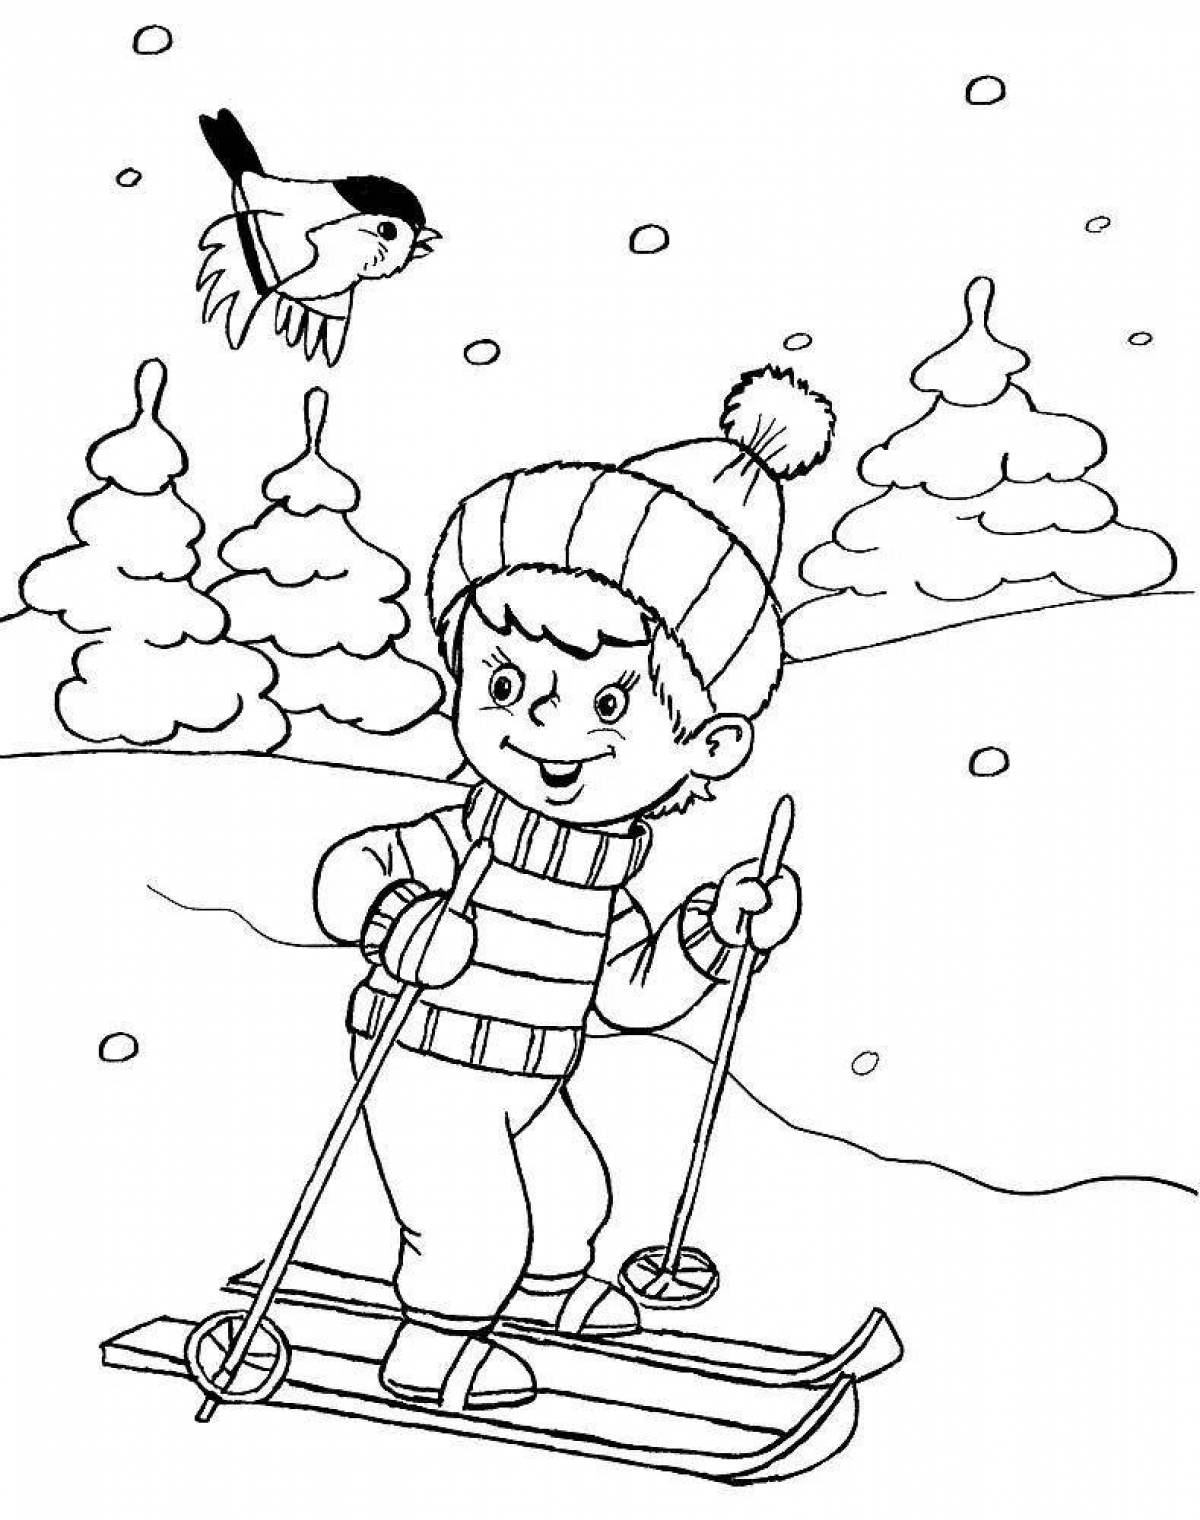 Awesome ski coloring pages for kids